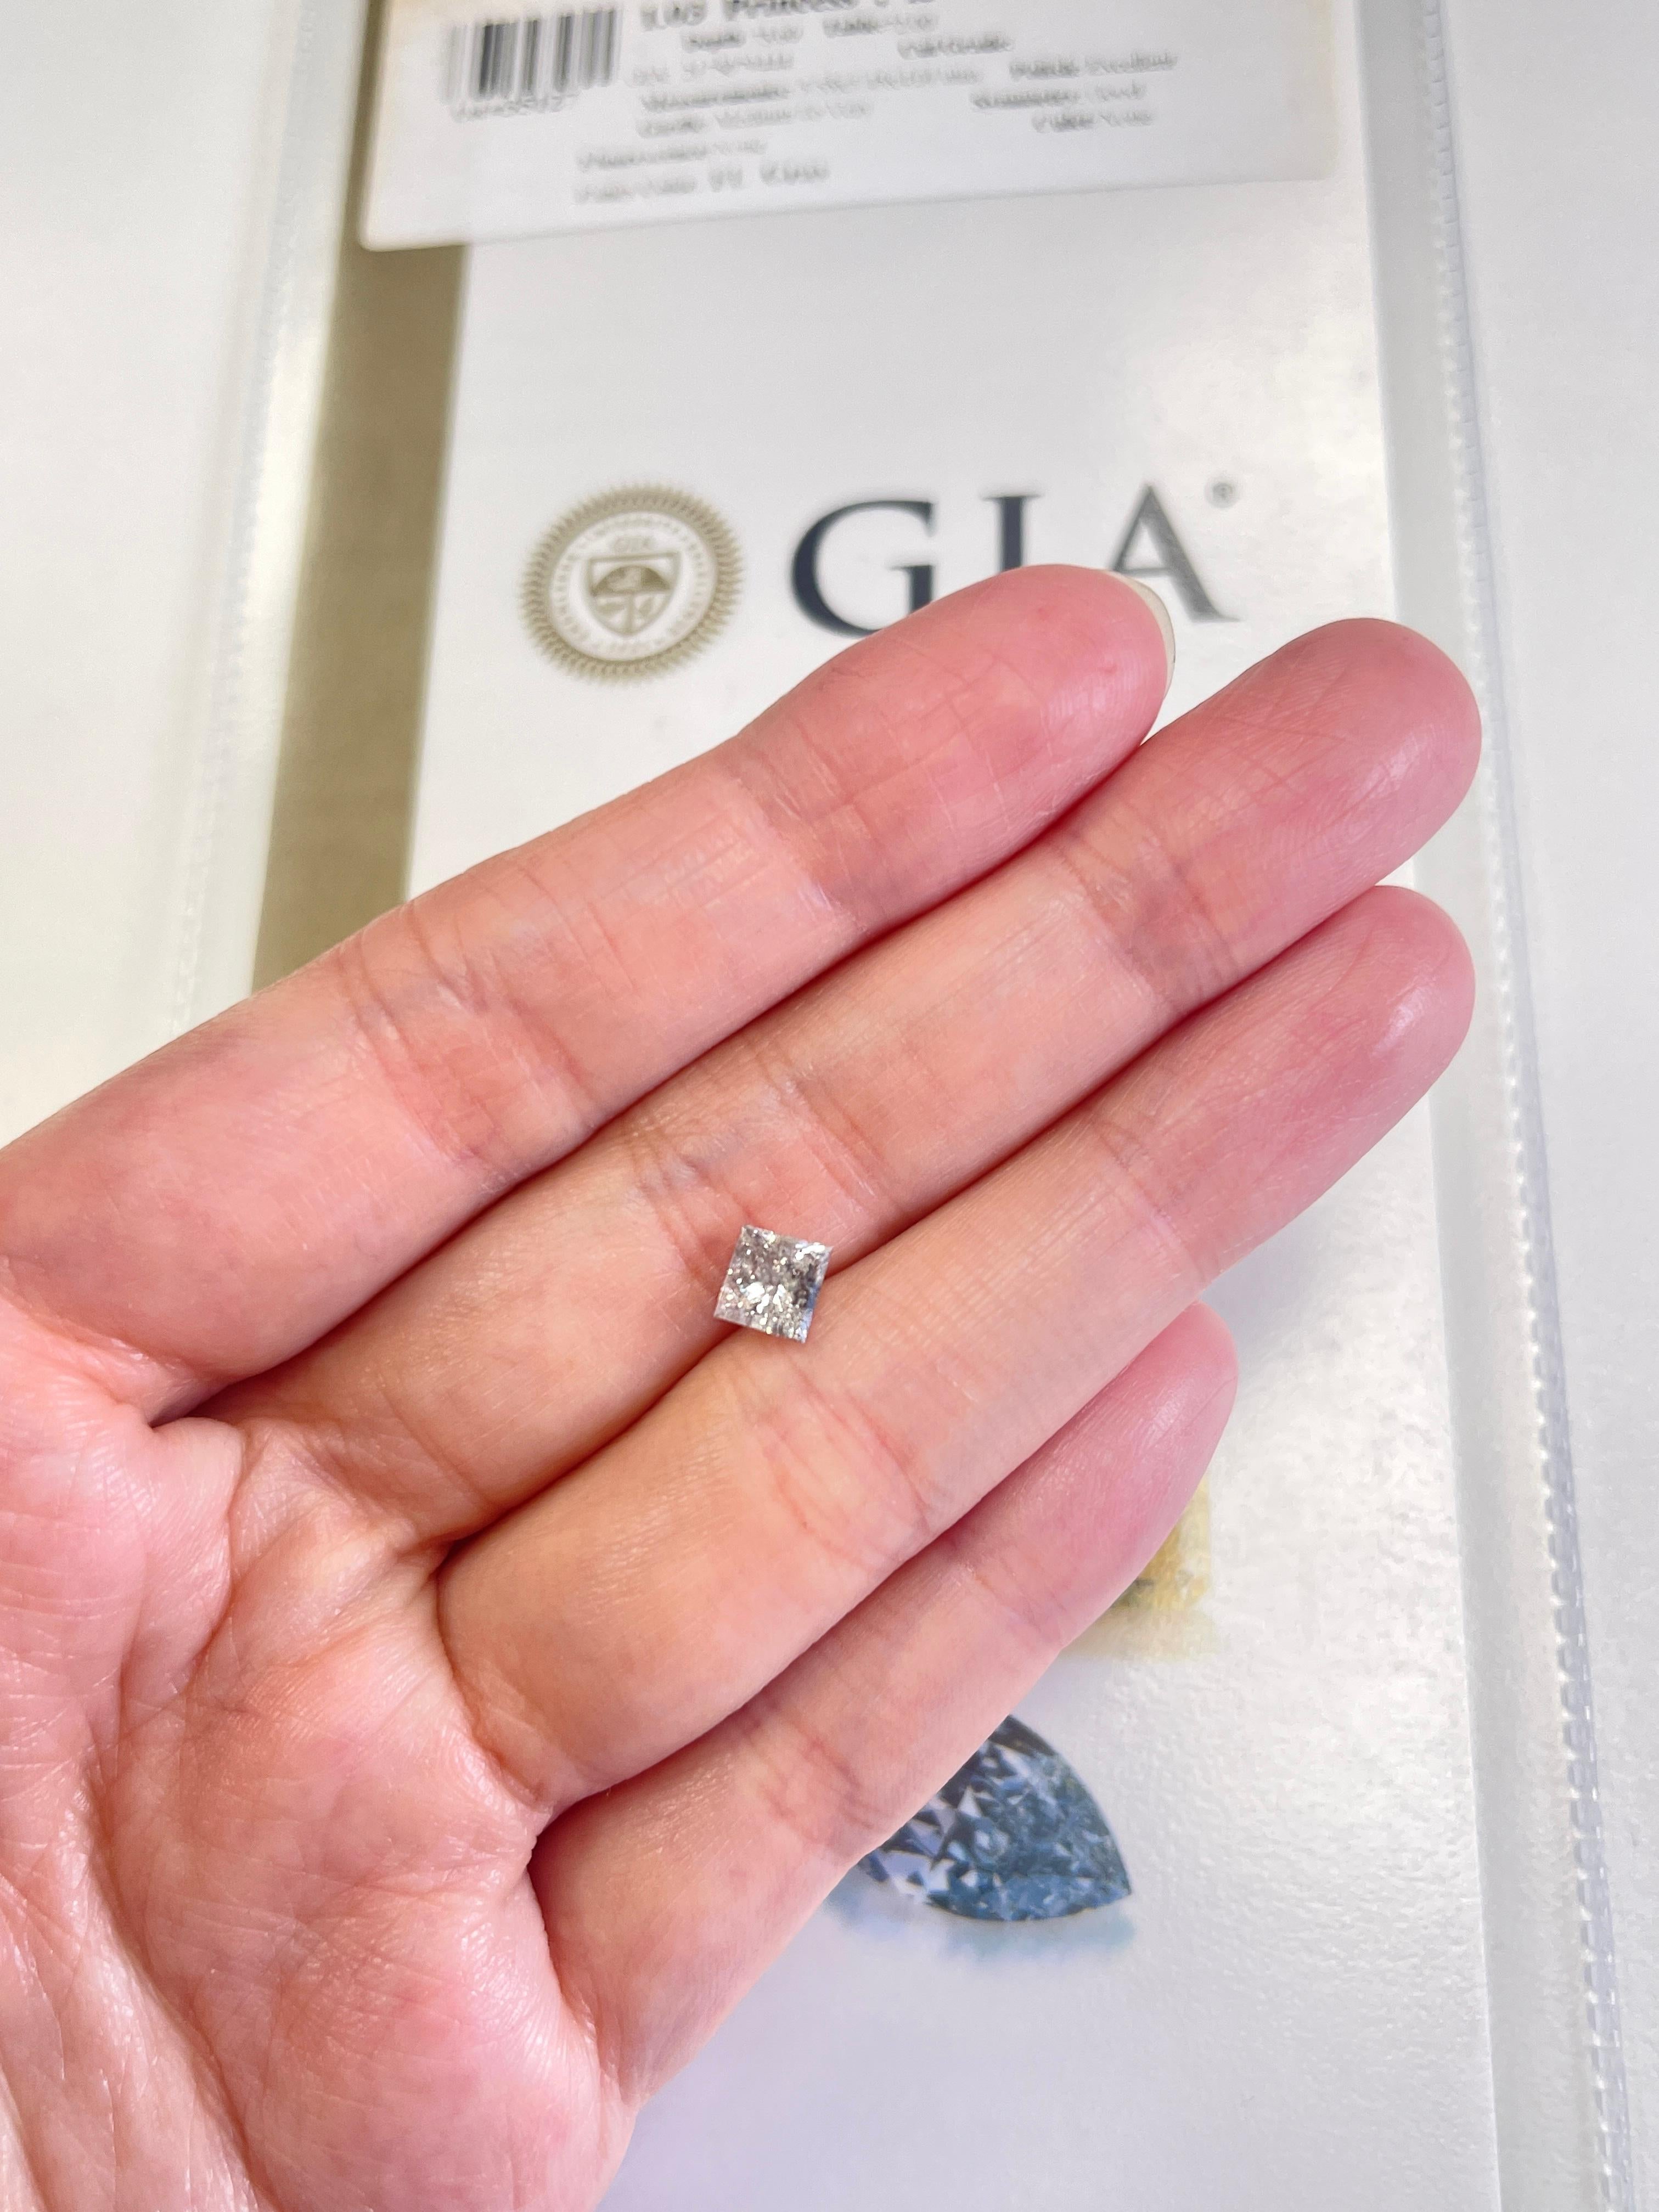 GIA 1.03 Carat Fancy Light Gray Princess Cut Natural Loose Diamond  In New Condition For Sale In Great Neck, NY